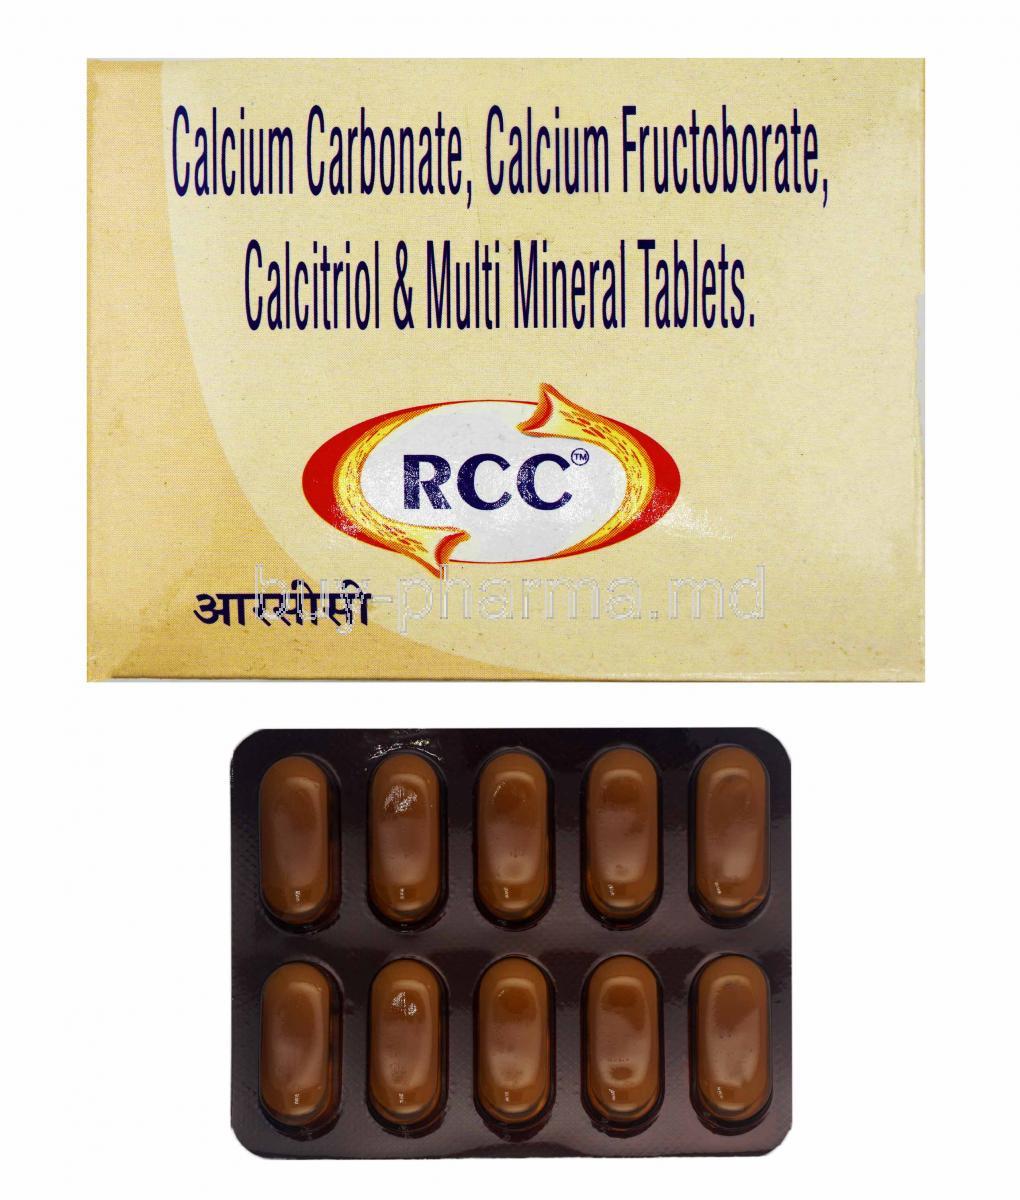 RCC box and tablets